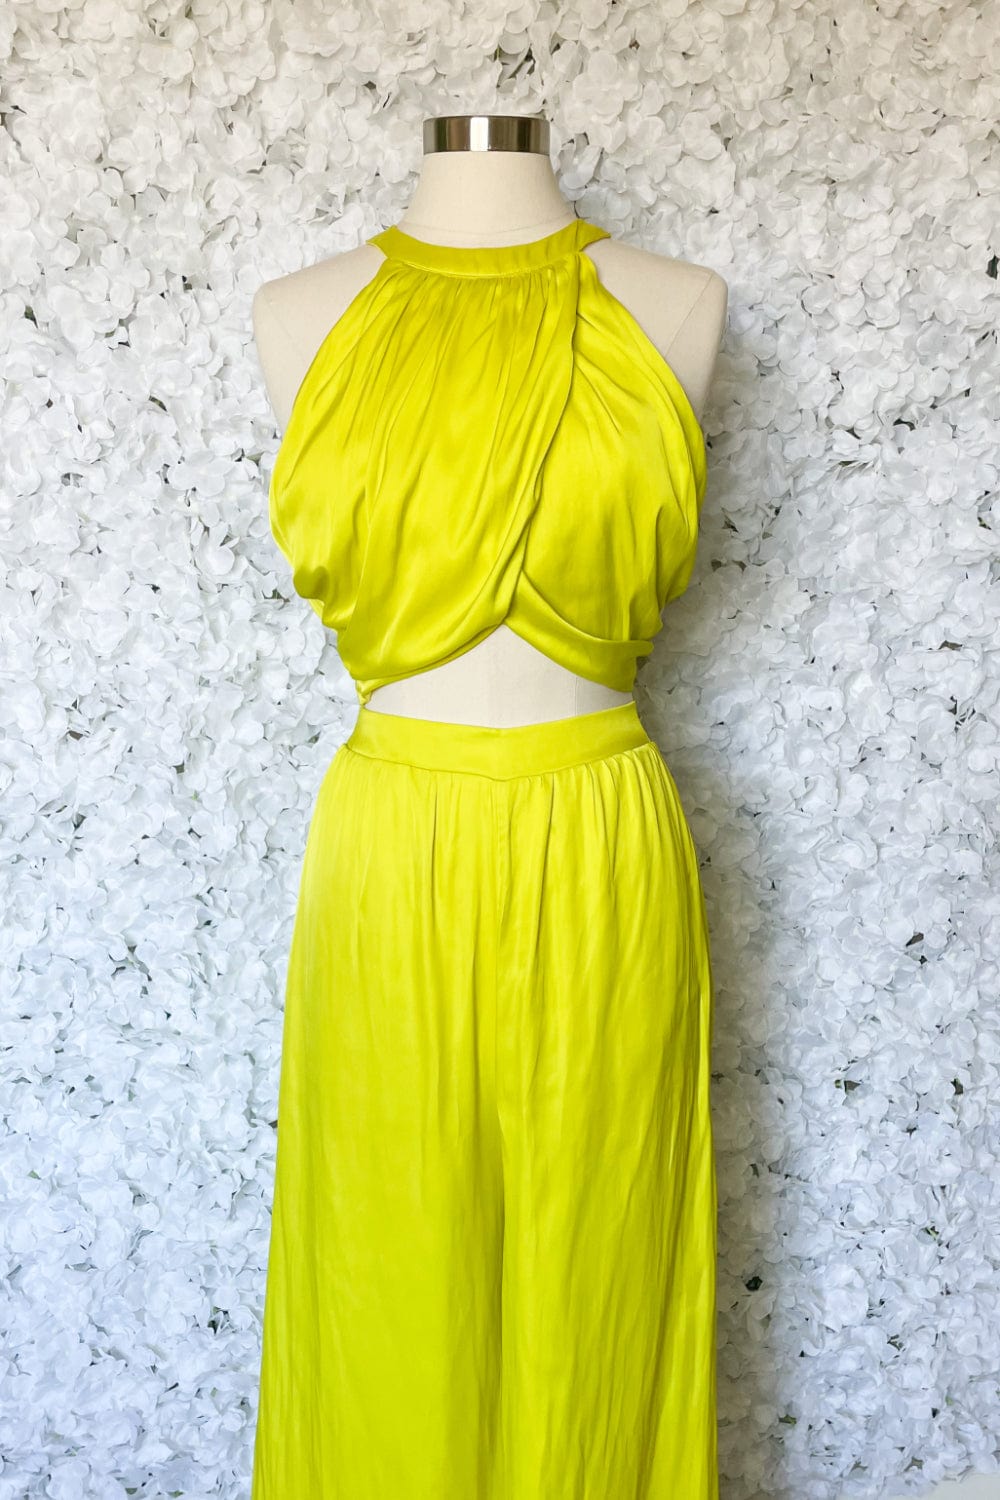 Cabo Margarita Pants - Outfit Sets - Blooming Daily